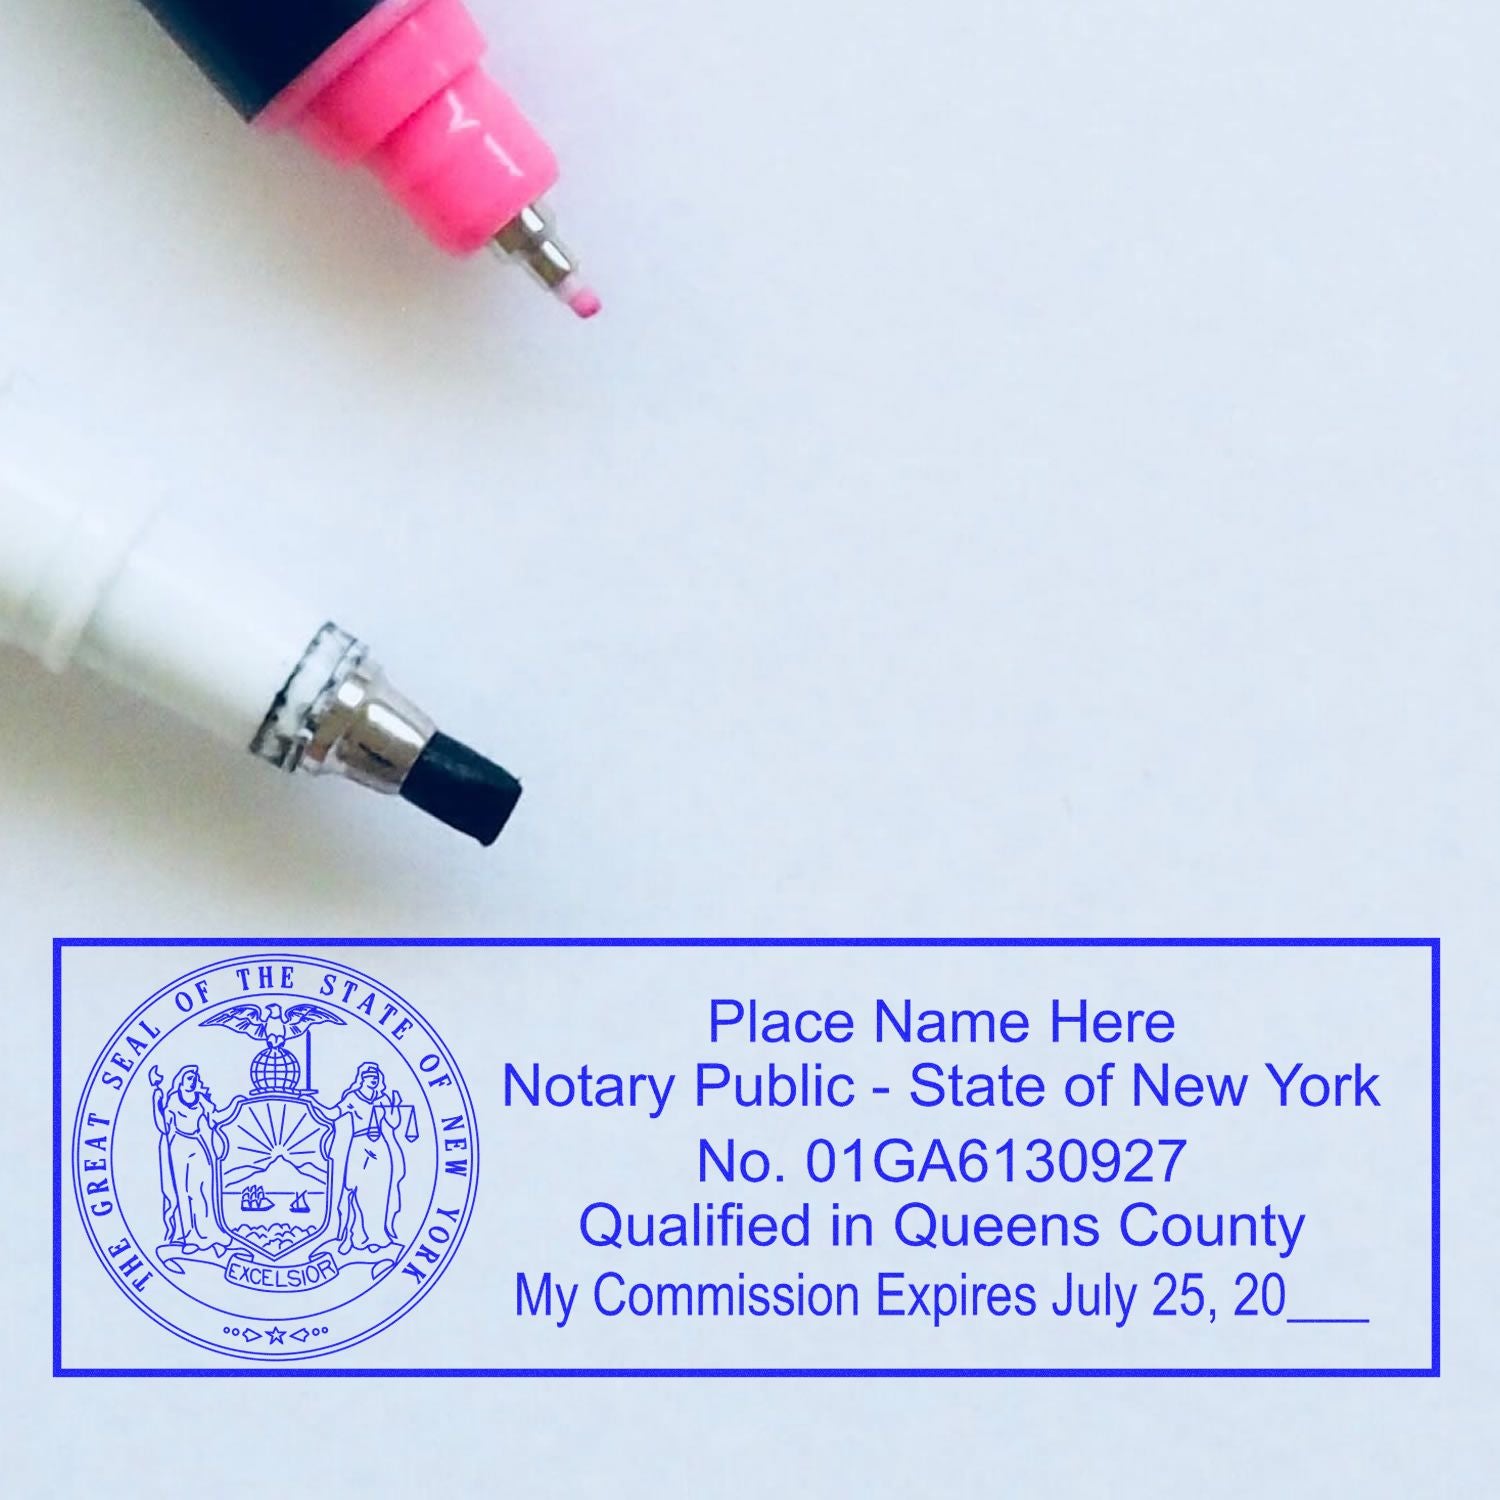 The main image for the Slim Pre-Inked State Seal Notary Stamp for New York depicting a sample of the imprint and electronic files